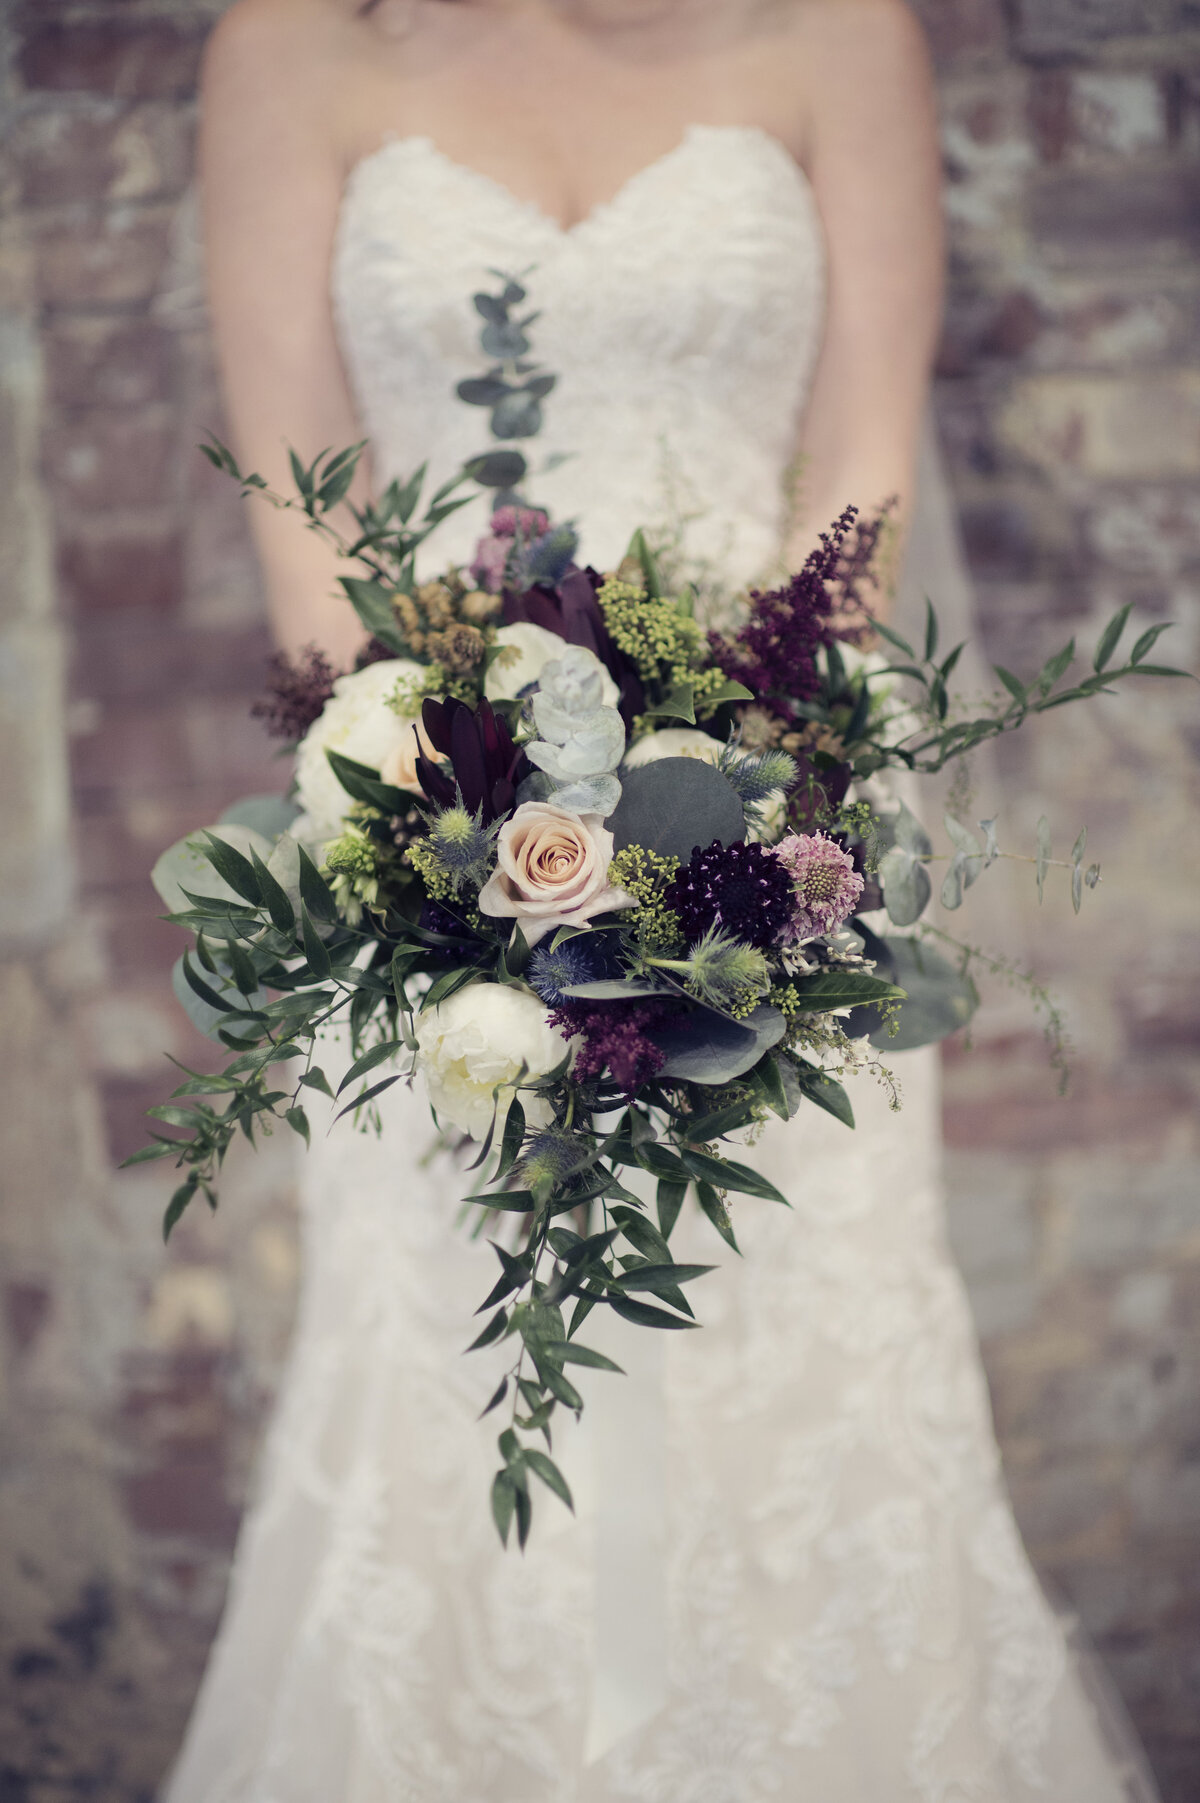 Kim Chapman Photography at Thompsons Point loves a beautiful bouquet